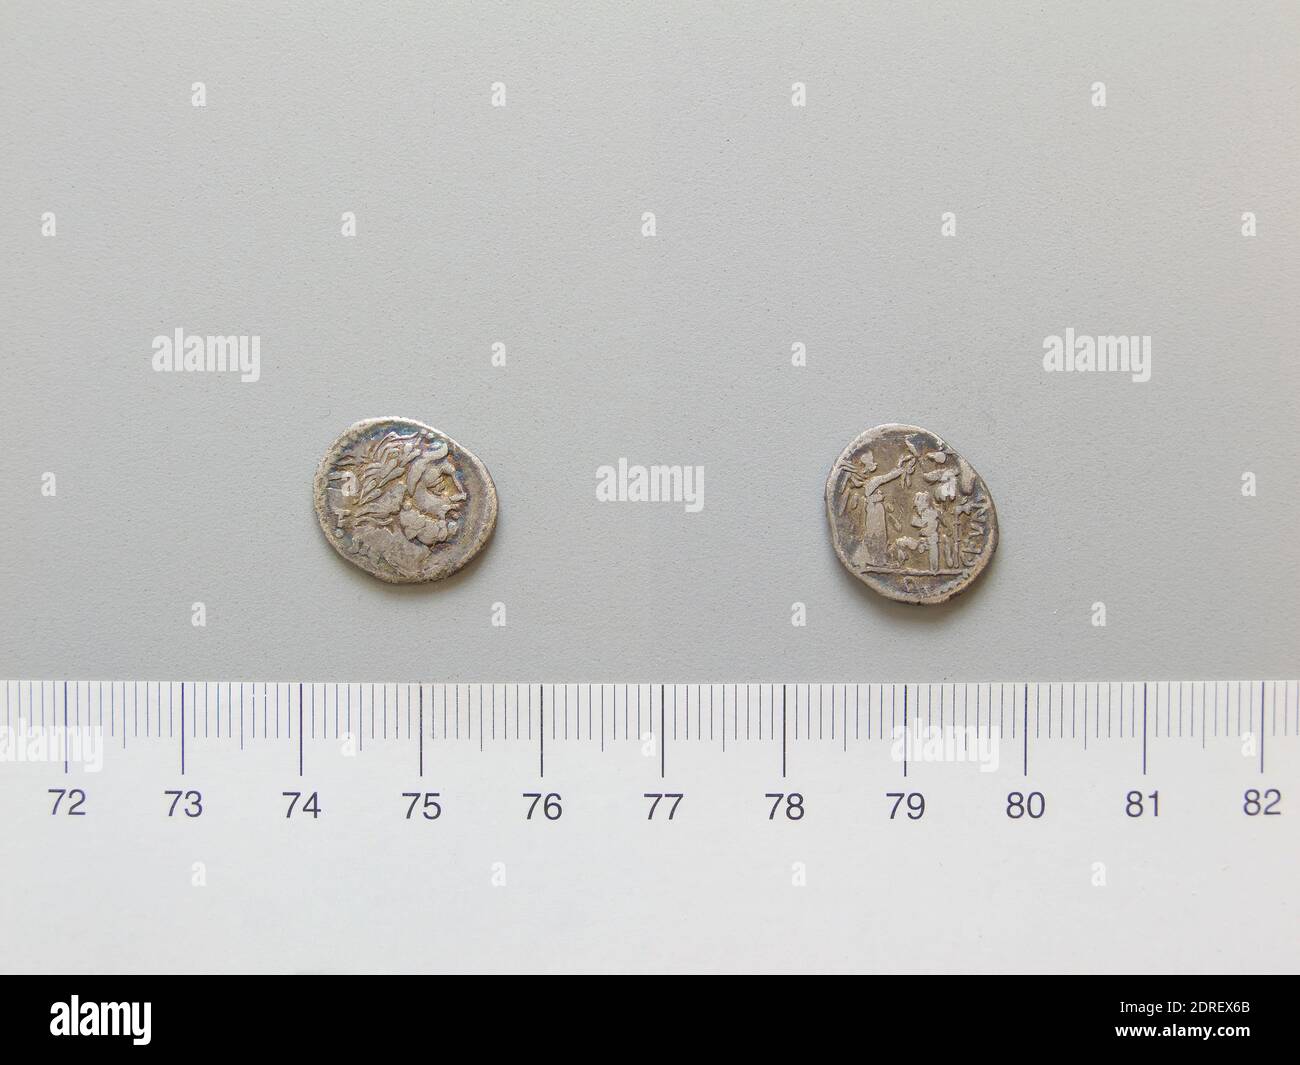 101 a.C., Argento, 1.85 g, 9:00, 15.00 mm, Made in Rome, Italy, Roman, II secolo a.C., Numismatica Foto Stock